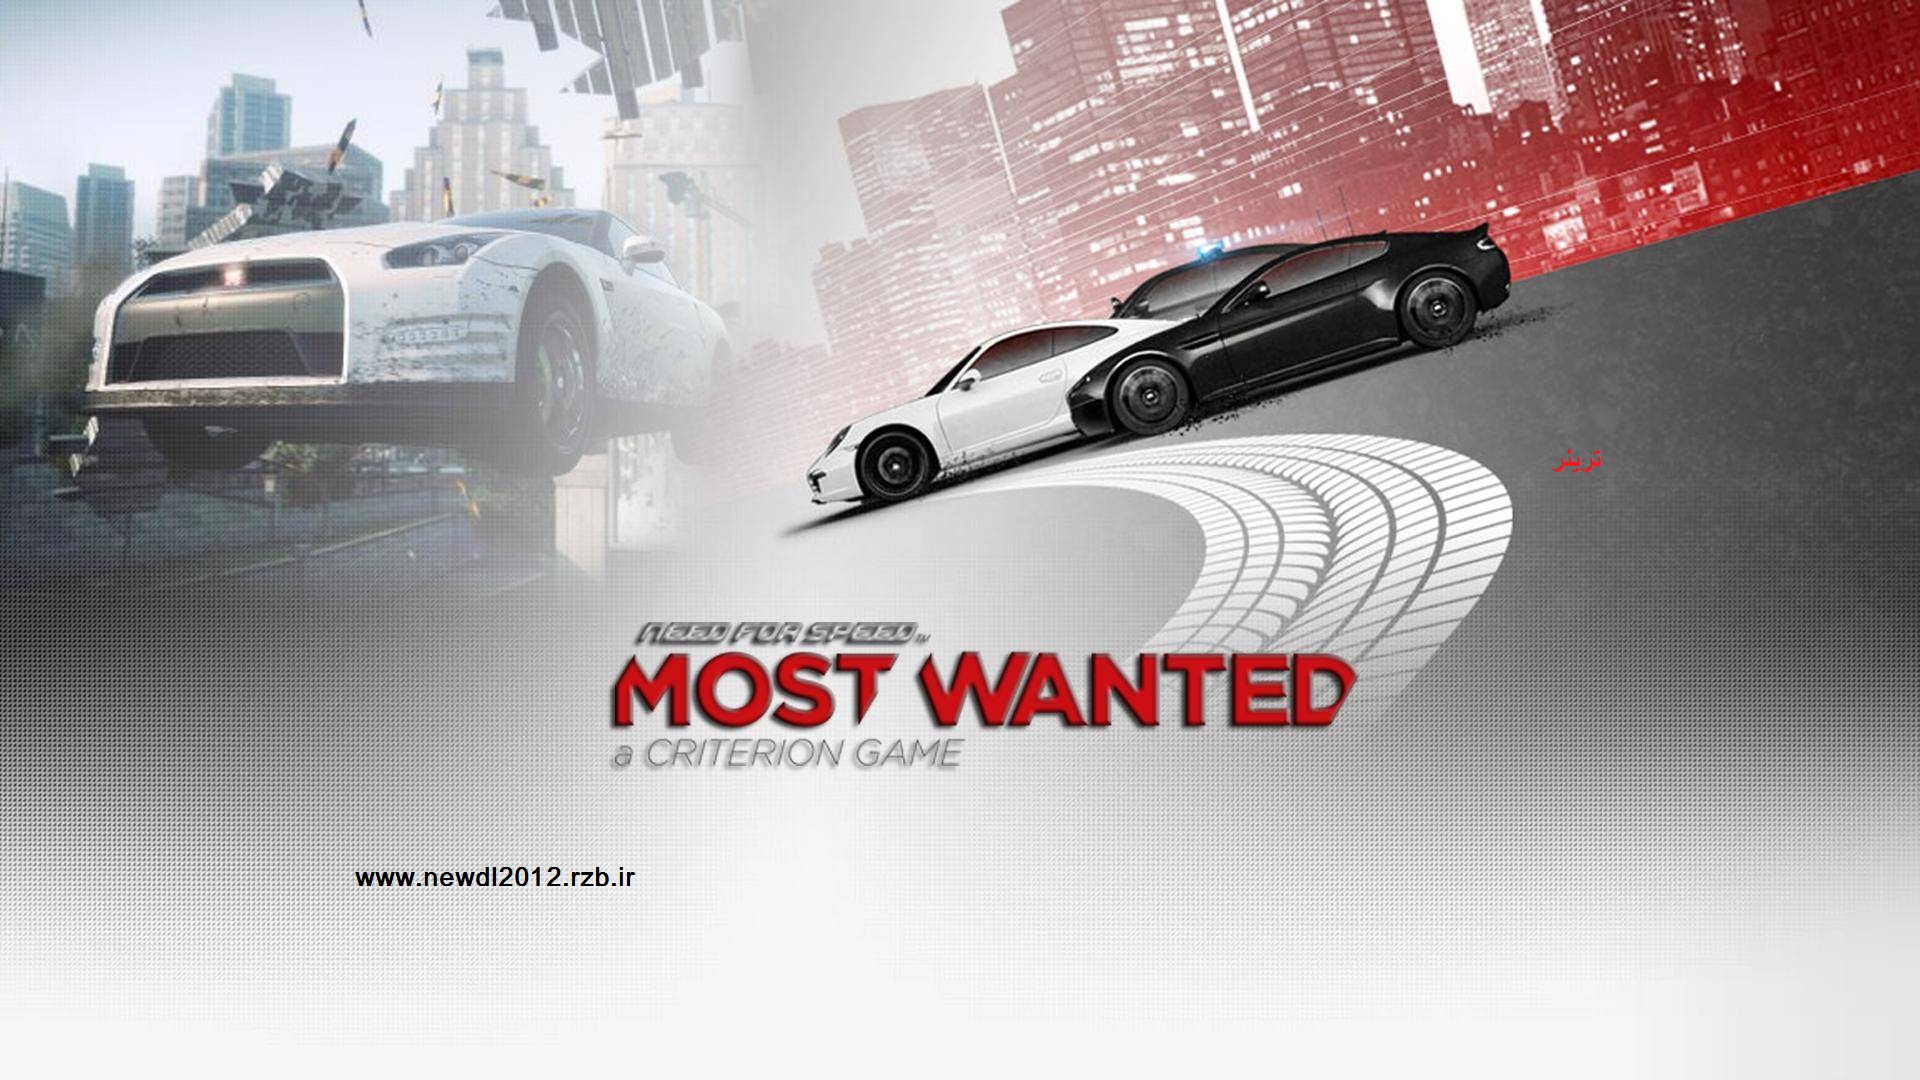 http://s3.picofile.com/file/7635623331/Need_For_Speed_Most_Wanted_2012_Wallpaper.jpg